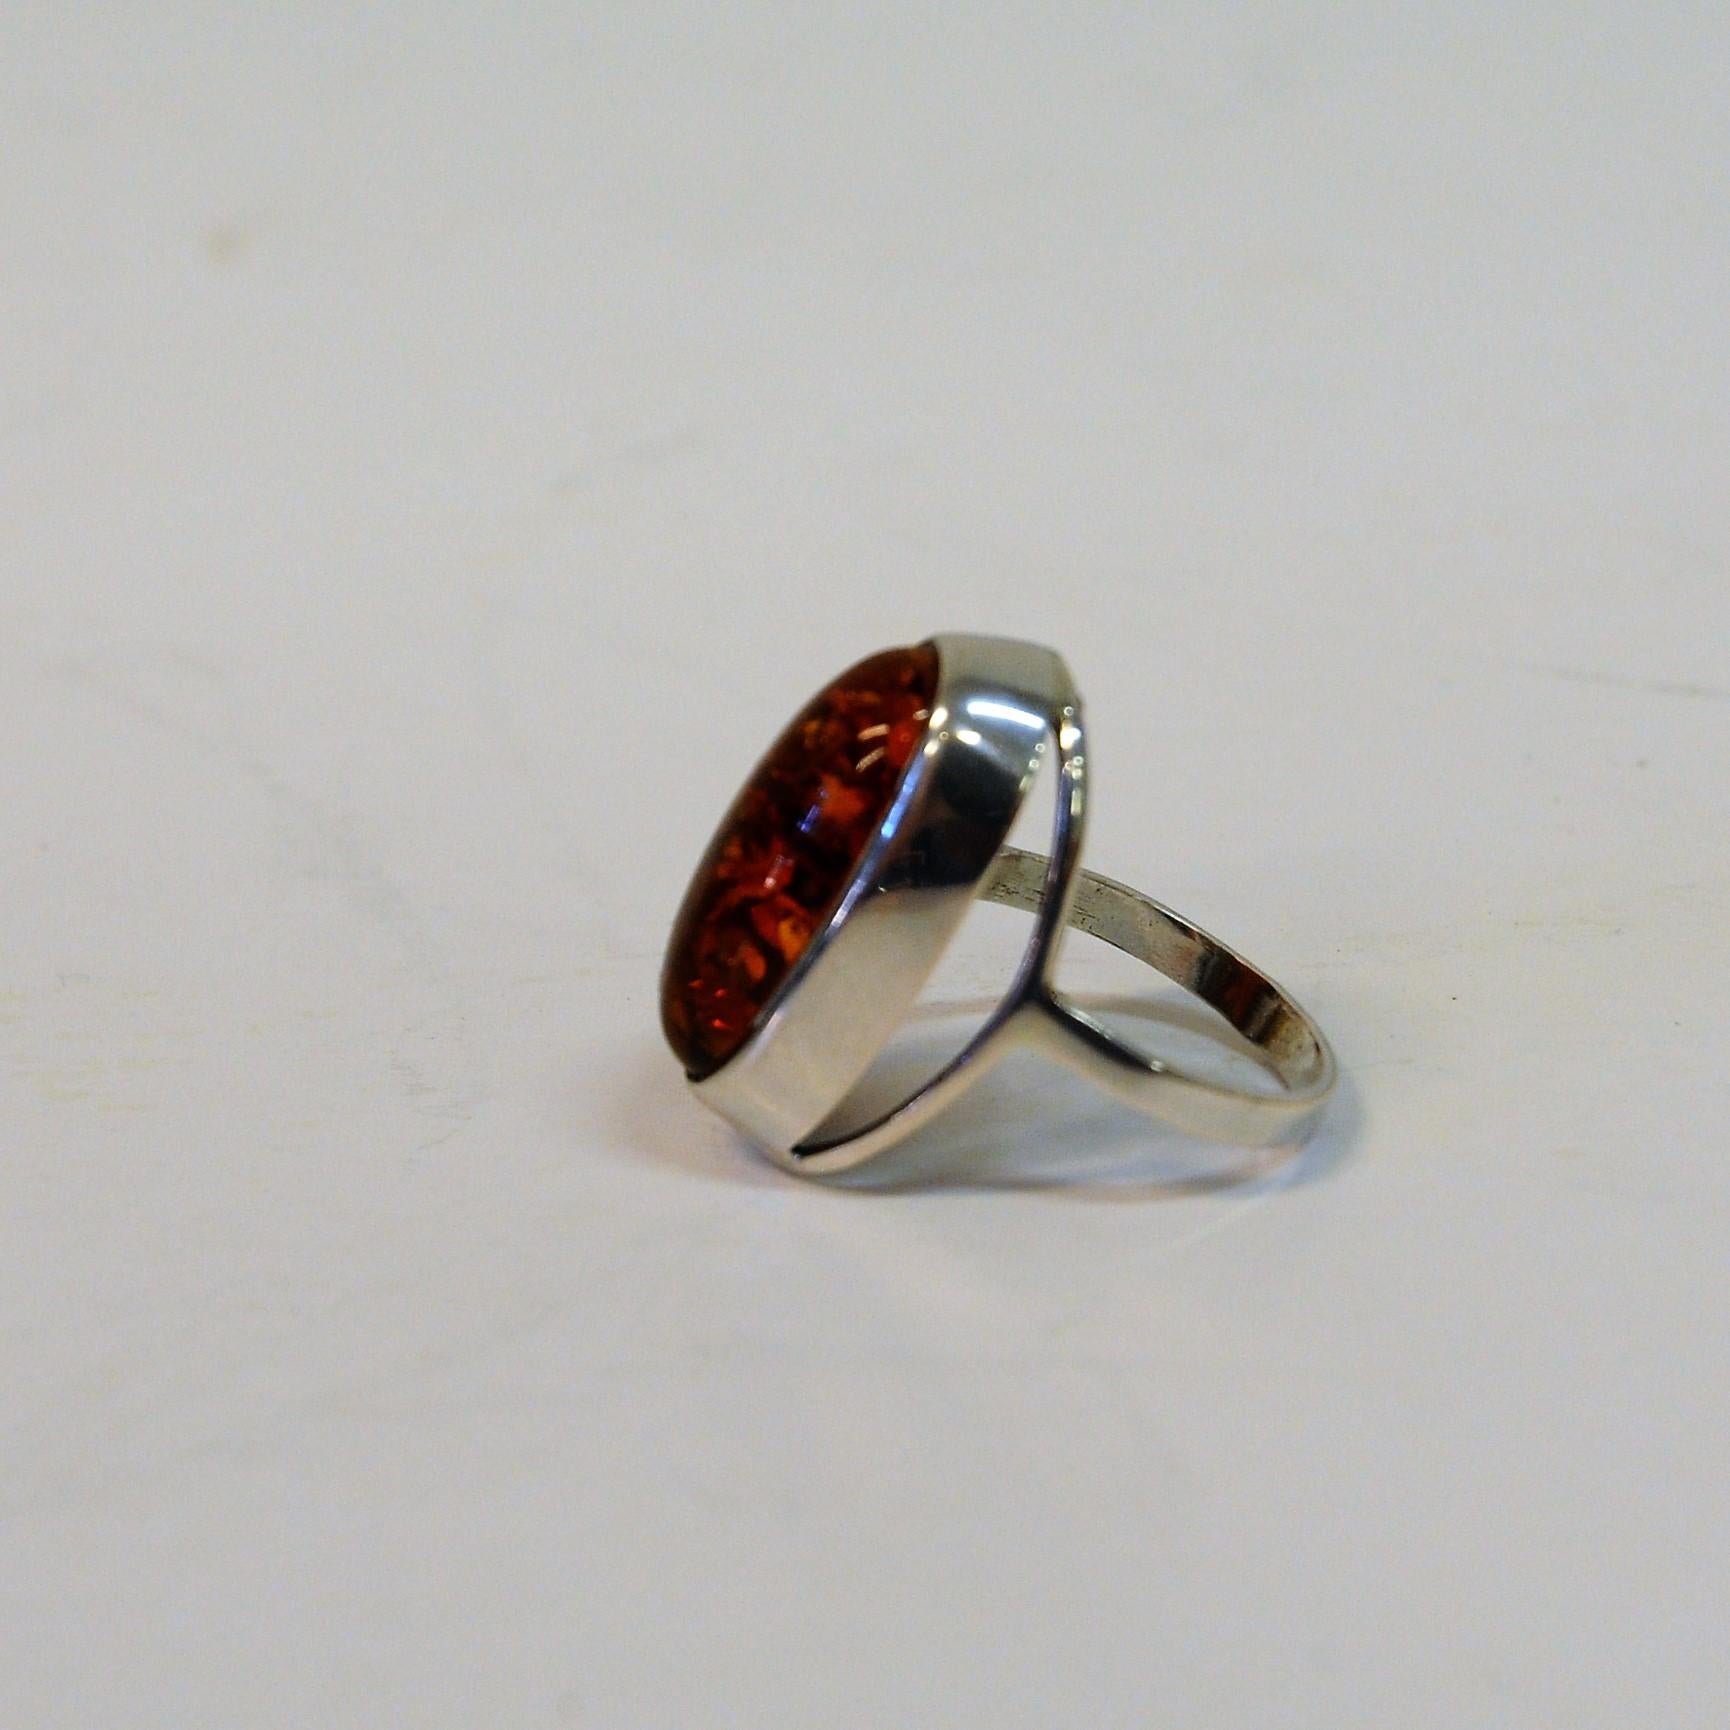 Attractive sterling silver ring with a big beautiful amber stone from the last midcentury (1960s) Denmark. (Nakskov, 1944-2009). Stamped. Sterling, Denmark, 925S & N. E. From. Size 52 mm. Perfect vintage condition.
 